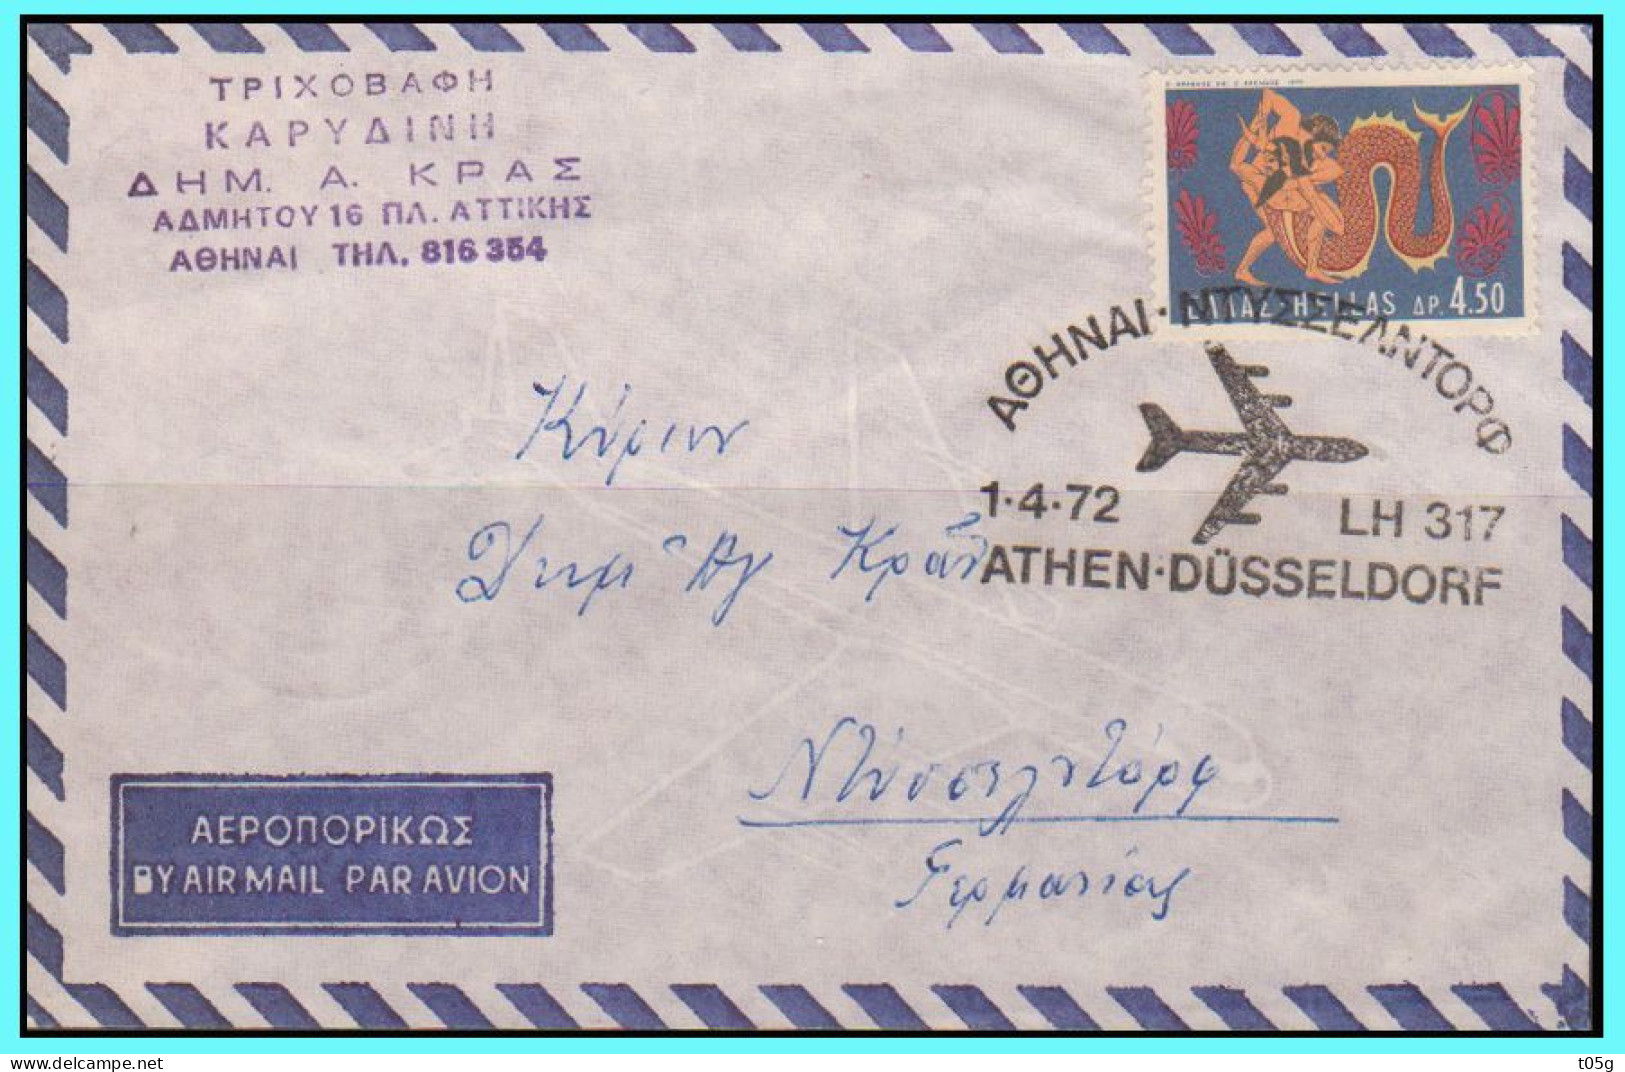 GREECE- GRECE - HELLAS:  FIRTS FLIGHT COVER ATHENS- DUSSELDORF 1-4-72  / LH 317 - Covers & Documents